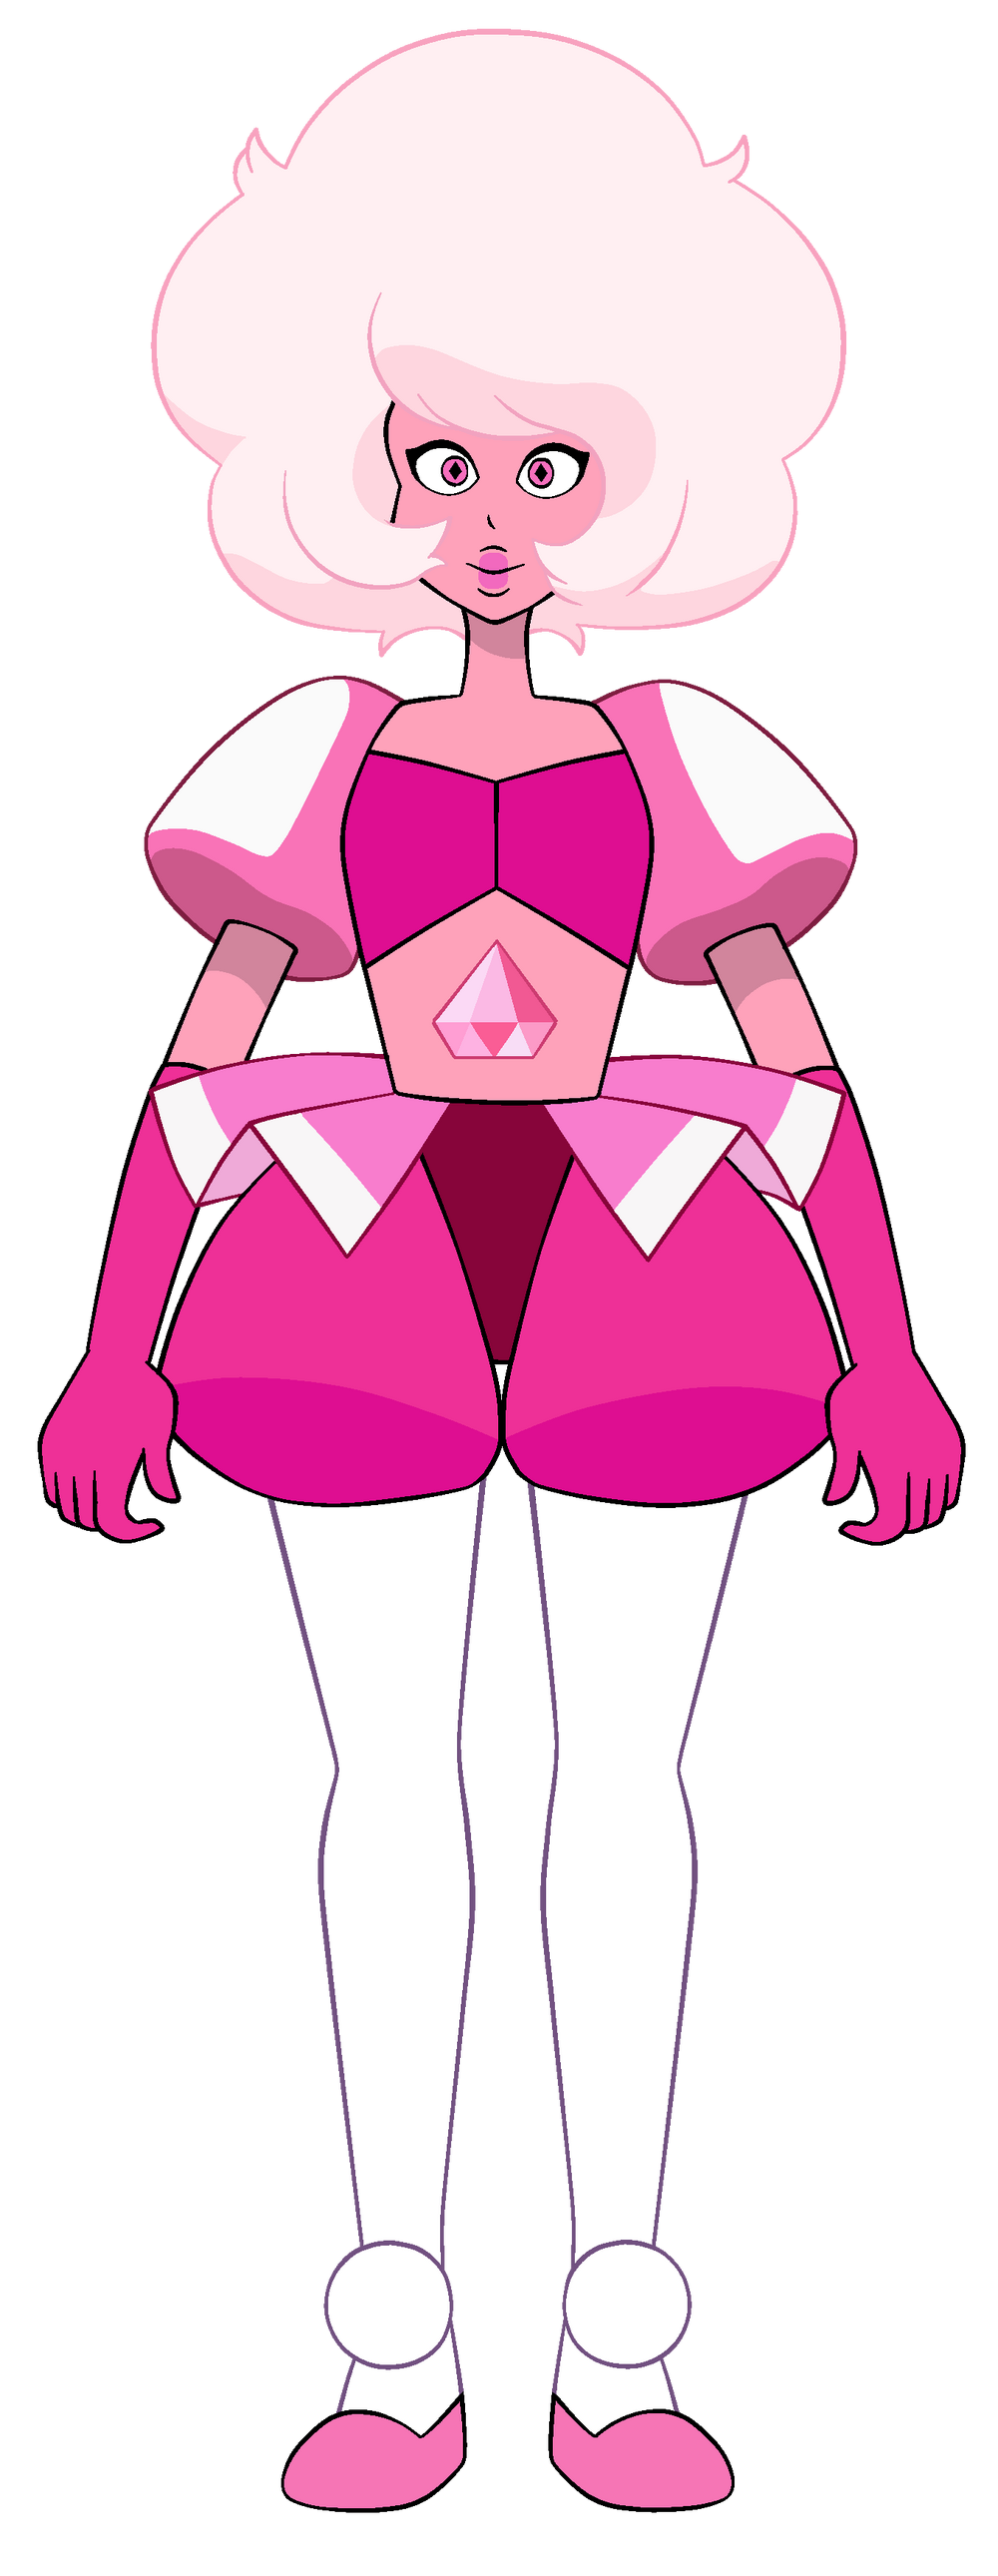 https://vignette.wikia.nocookie.net/steven-universe/images/f/f2/IWillEndYou_by_Koo.png/revision/latest/scale-to-width-down/1000?cb=20180508174125